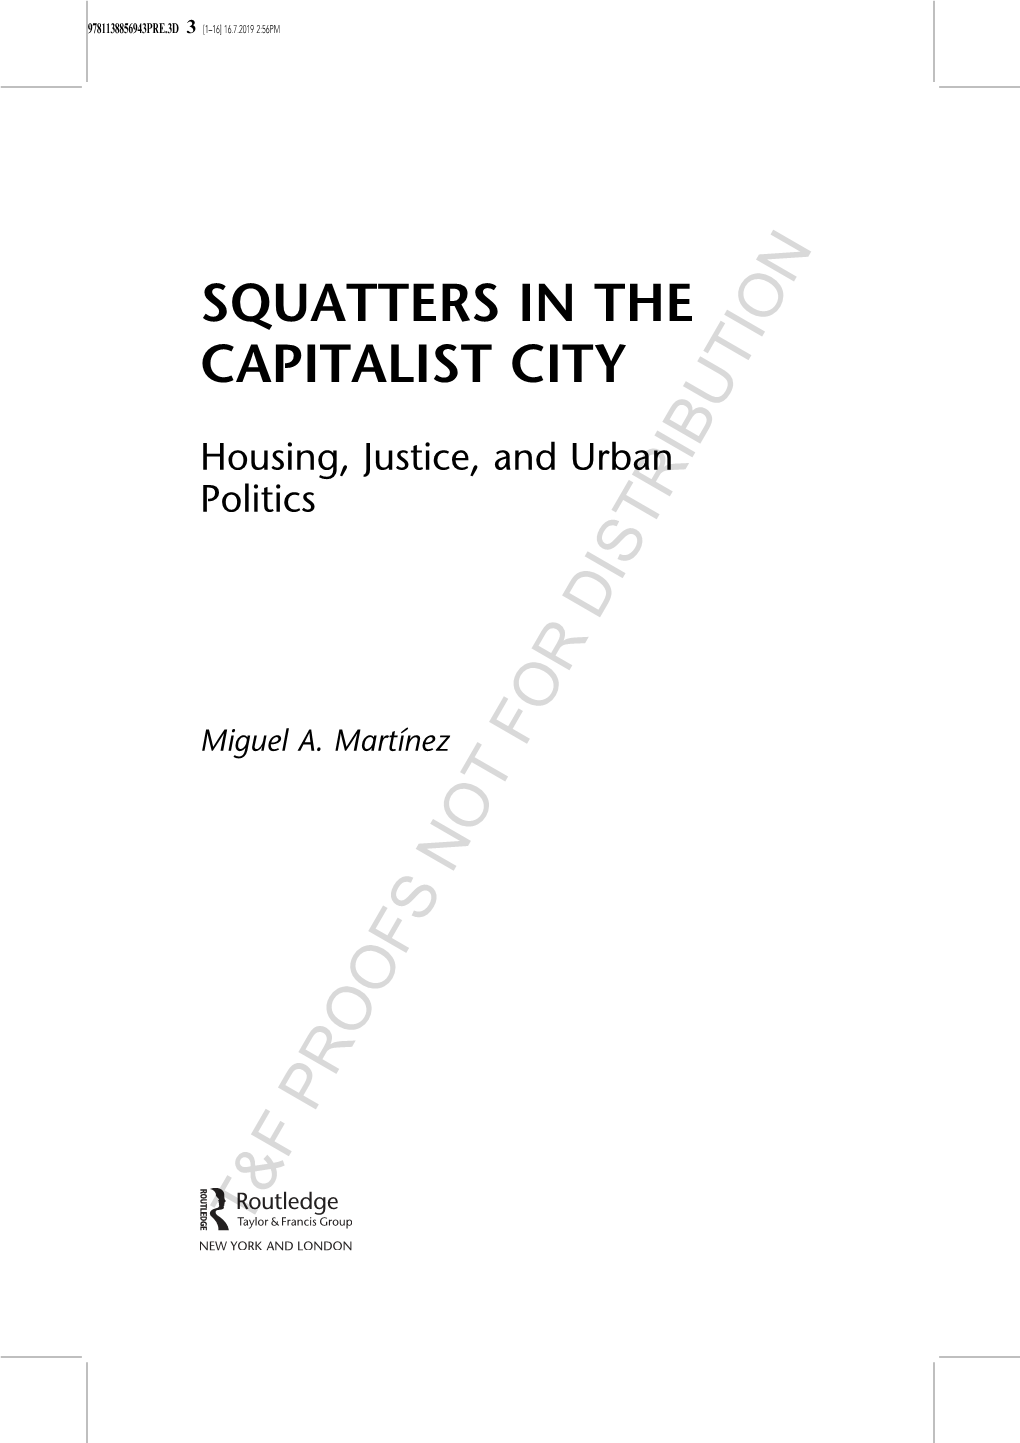 Squatters in the Capitalist City. Housing, Justice and Urban Politics